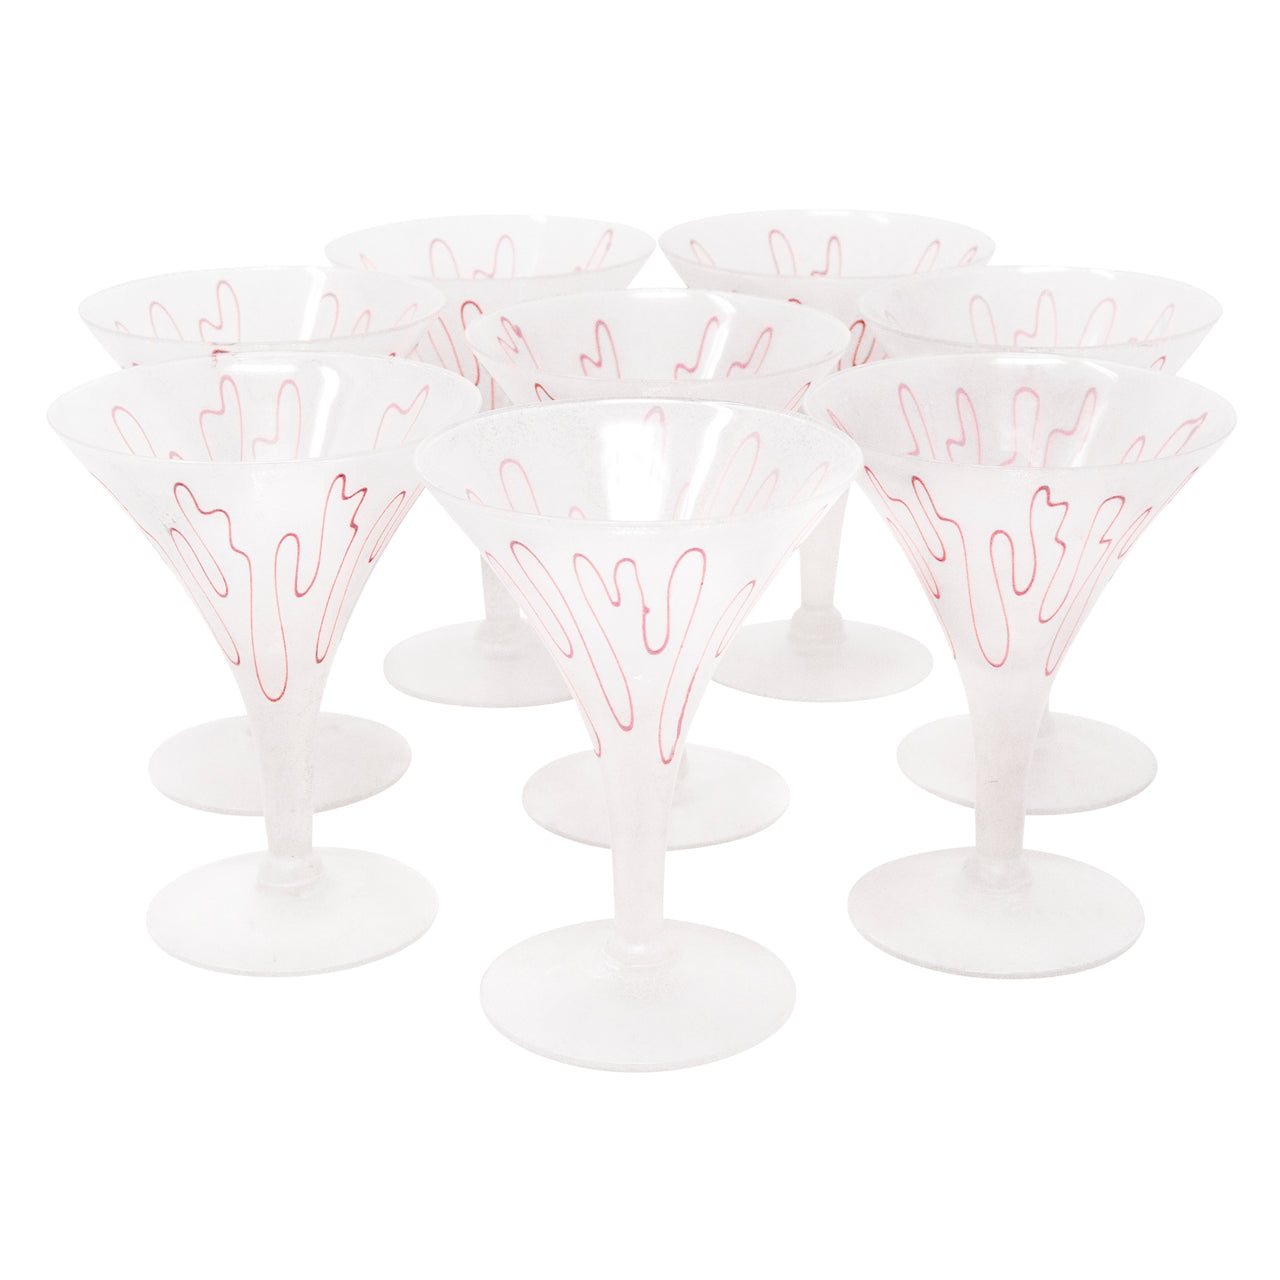 https://thehourshop.com/cdn/shop/products/19187-Vintage-Hand-Painted-Swirls-Speckle-Pink-Frosted-Martini-Glasses_1280x1280.jpg?v=1591911192